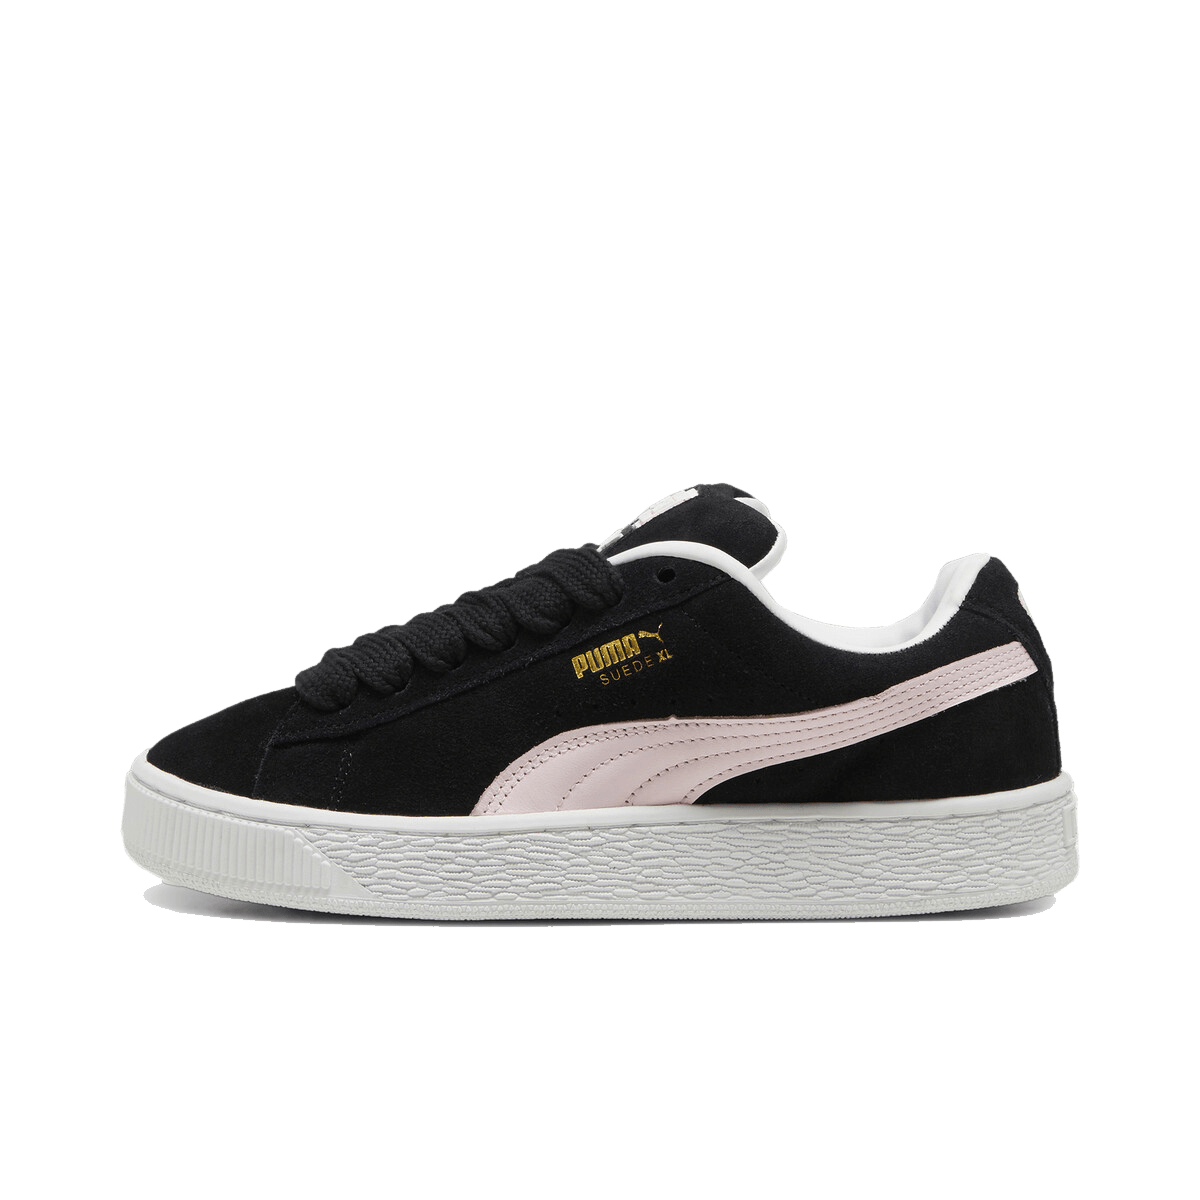 Puma Suede XL 'Whisp Of Pink' 397648-04